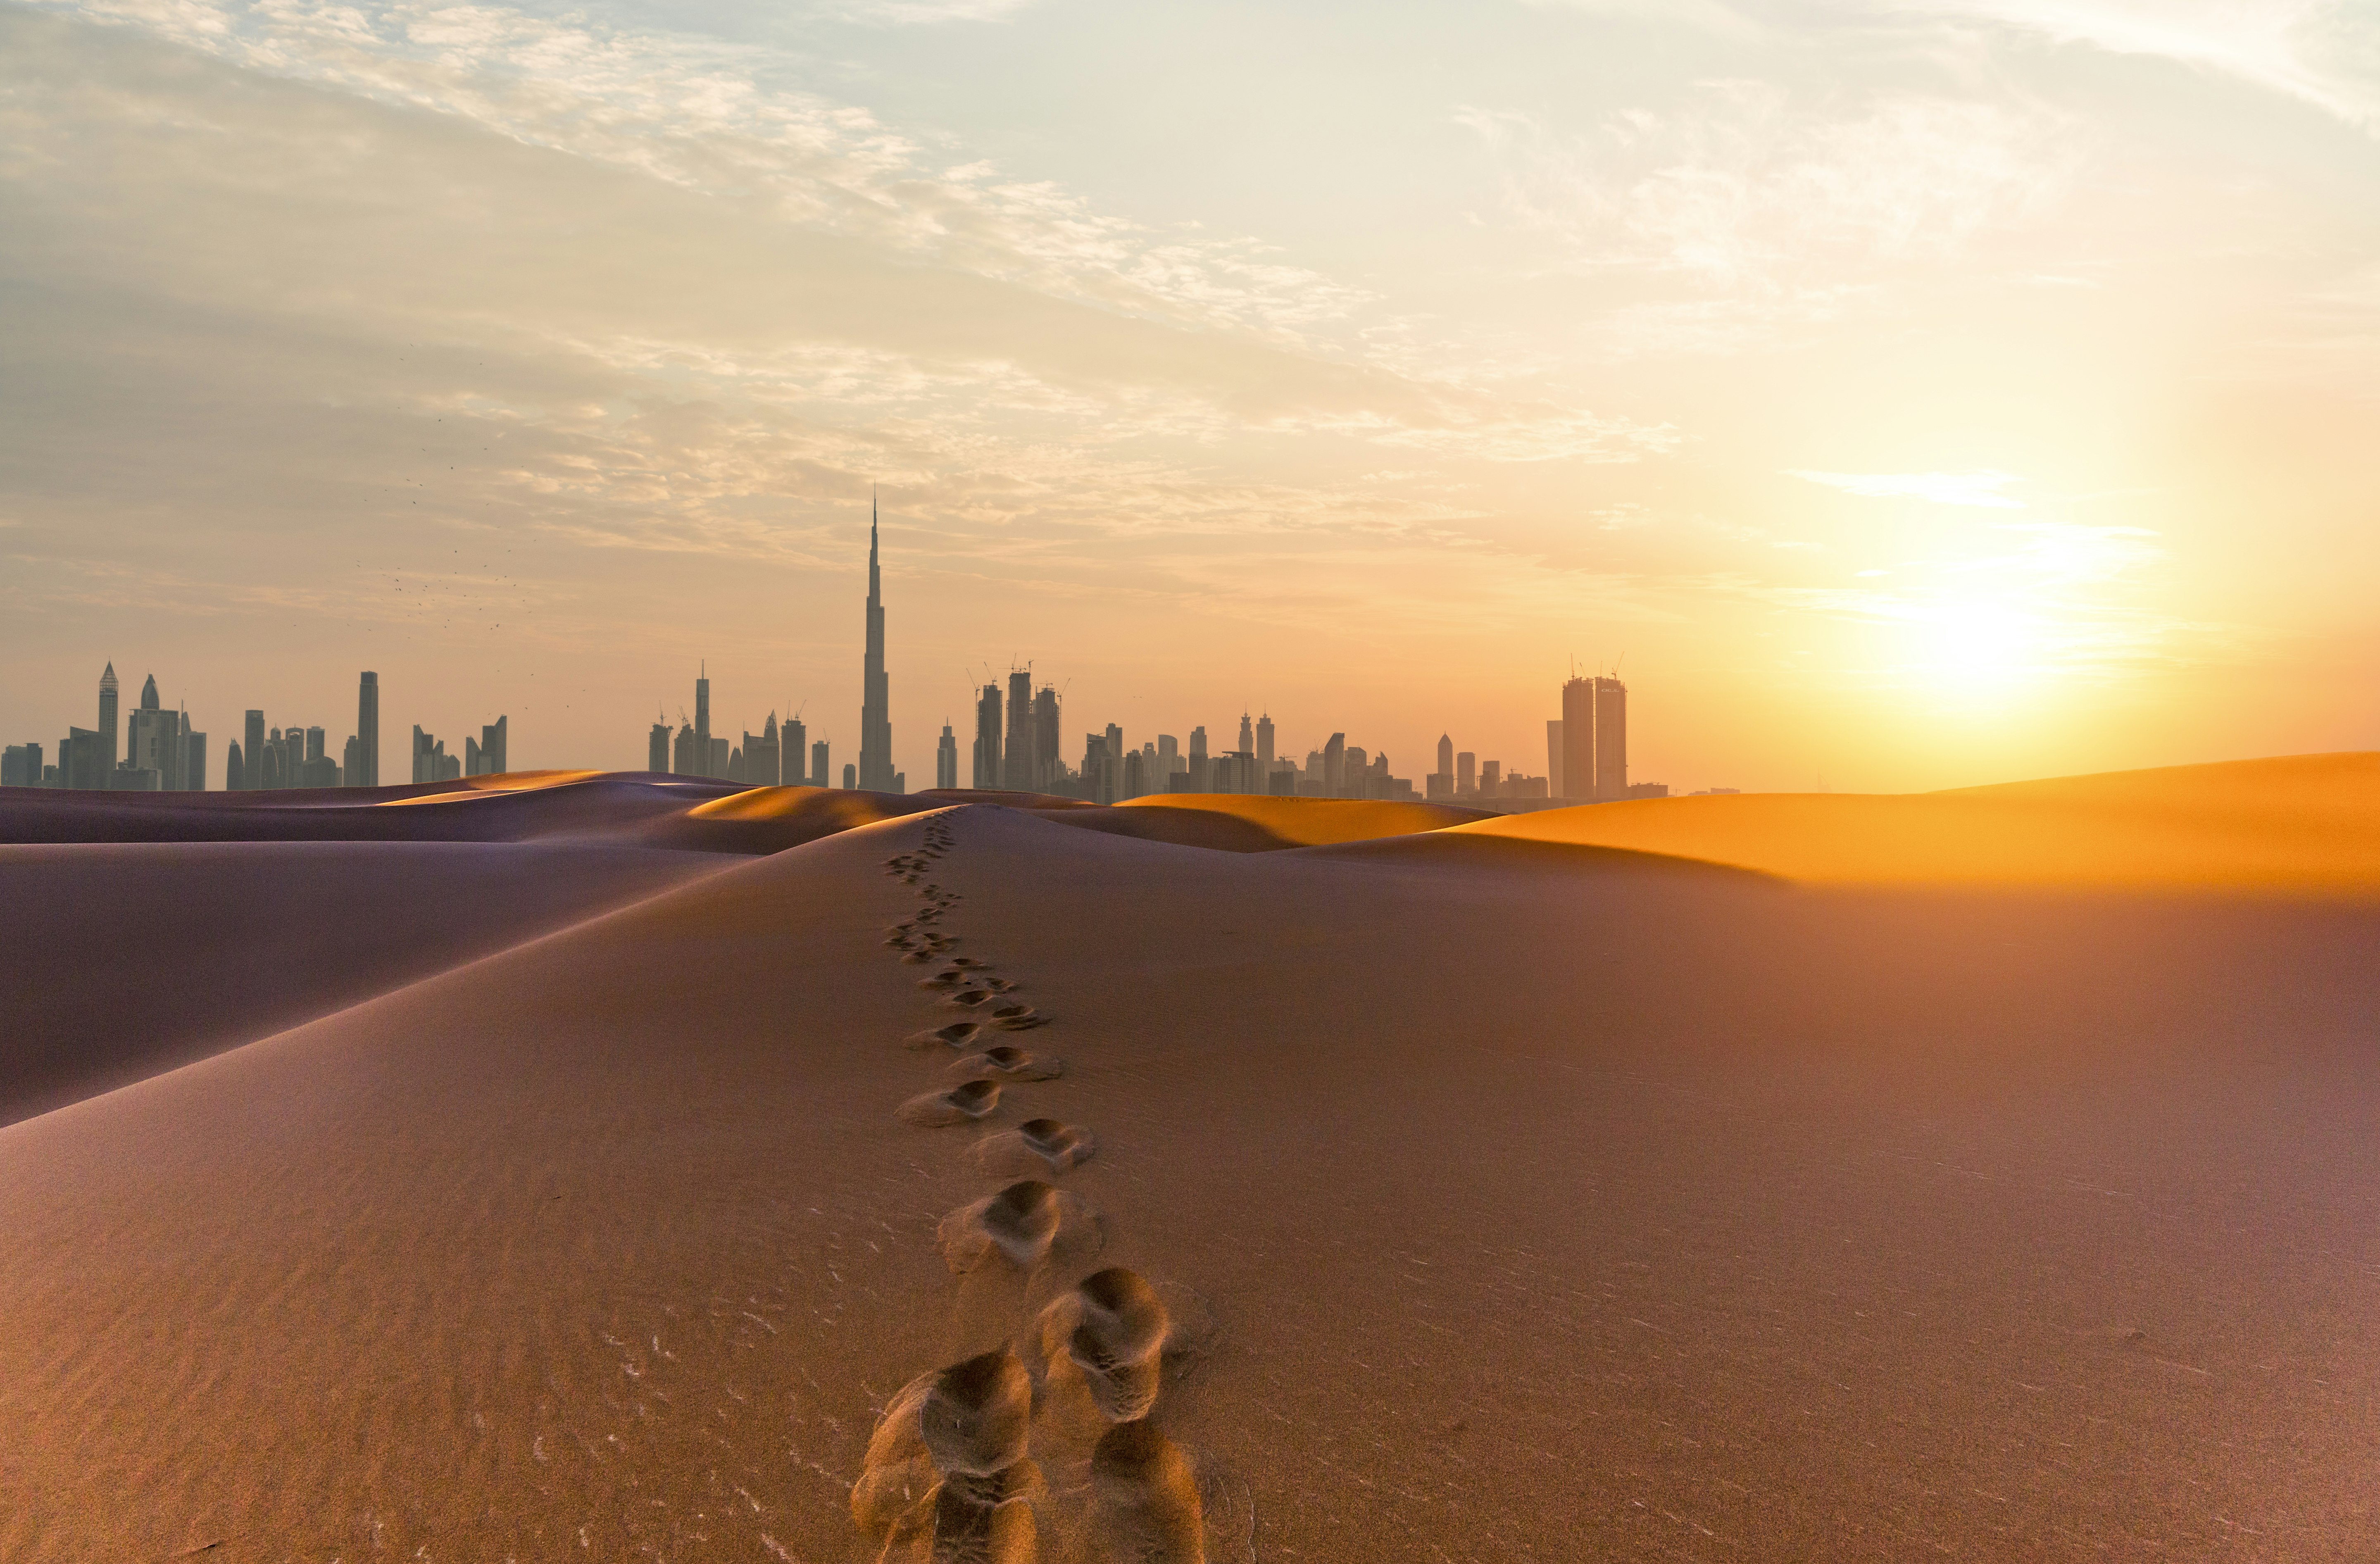 Footsteps in the desert sand heading towards the skyscrapers of the Dubai city skyline at dawn.